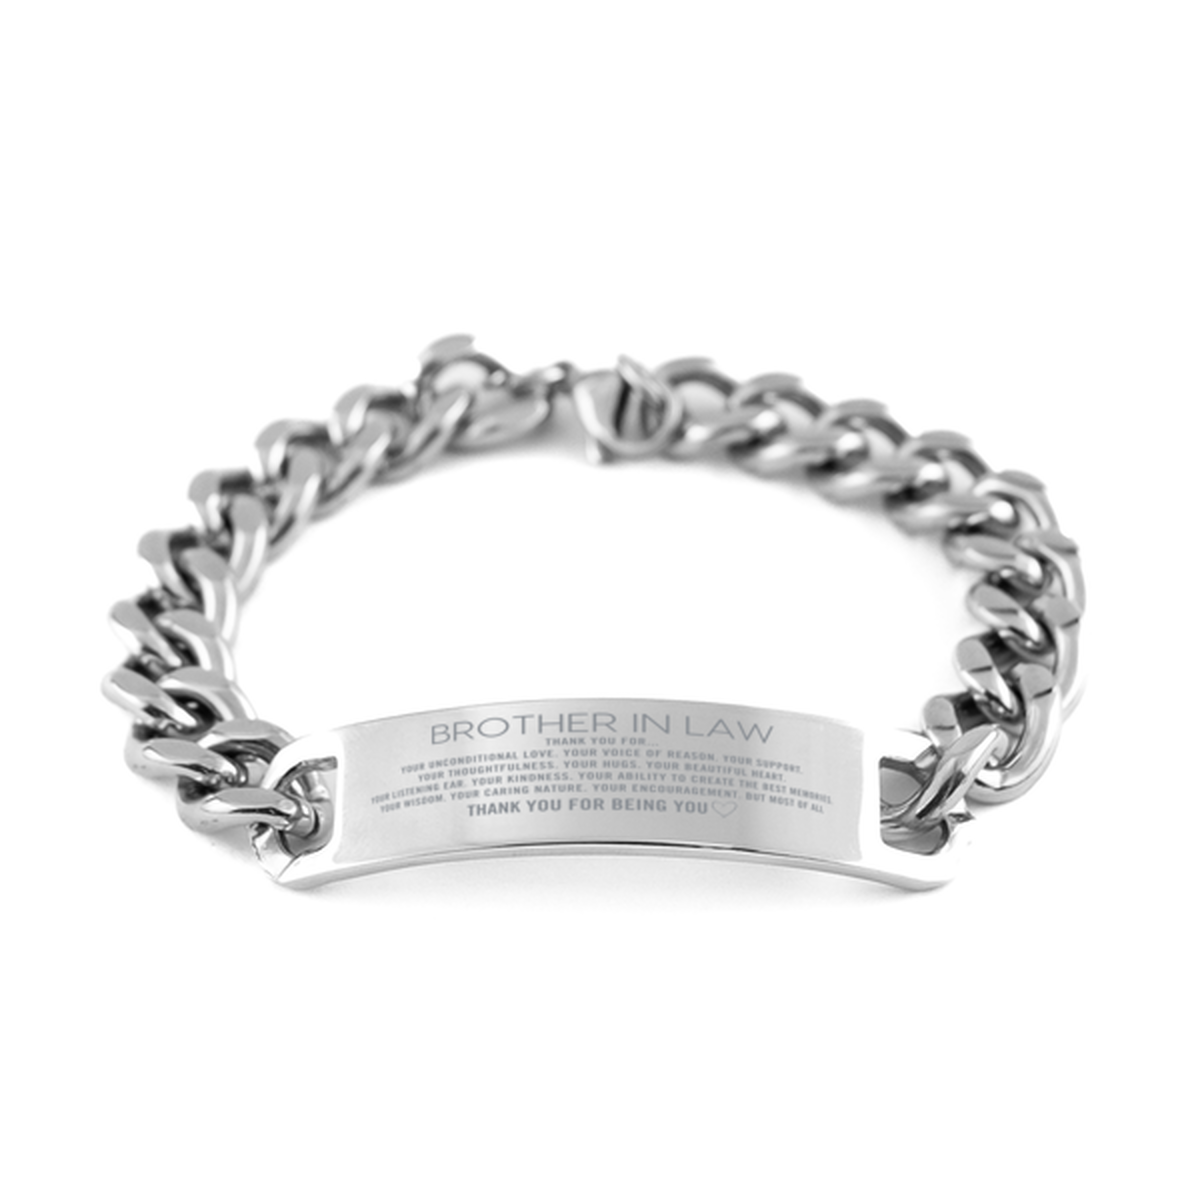 Brother In Law Cuban Chain Stainless Steel Bracelet Custom, Engraved Gifts For Brother In Law Christmas Graduation Birthday Gifts for Men Women Brother In Law Thank you for Your unconditional love